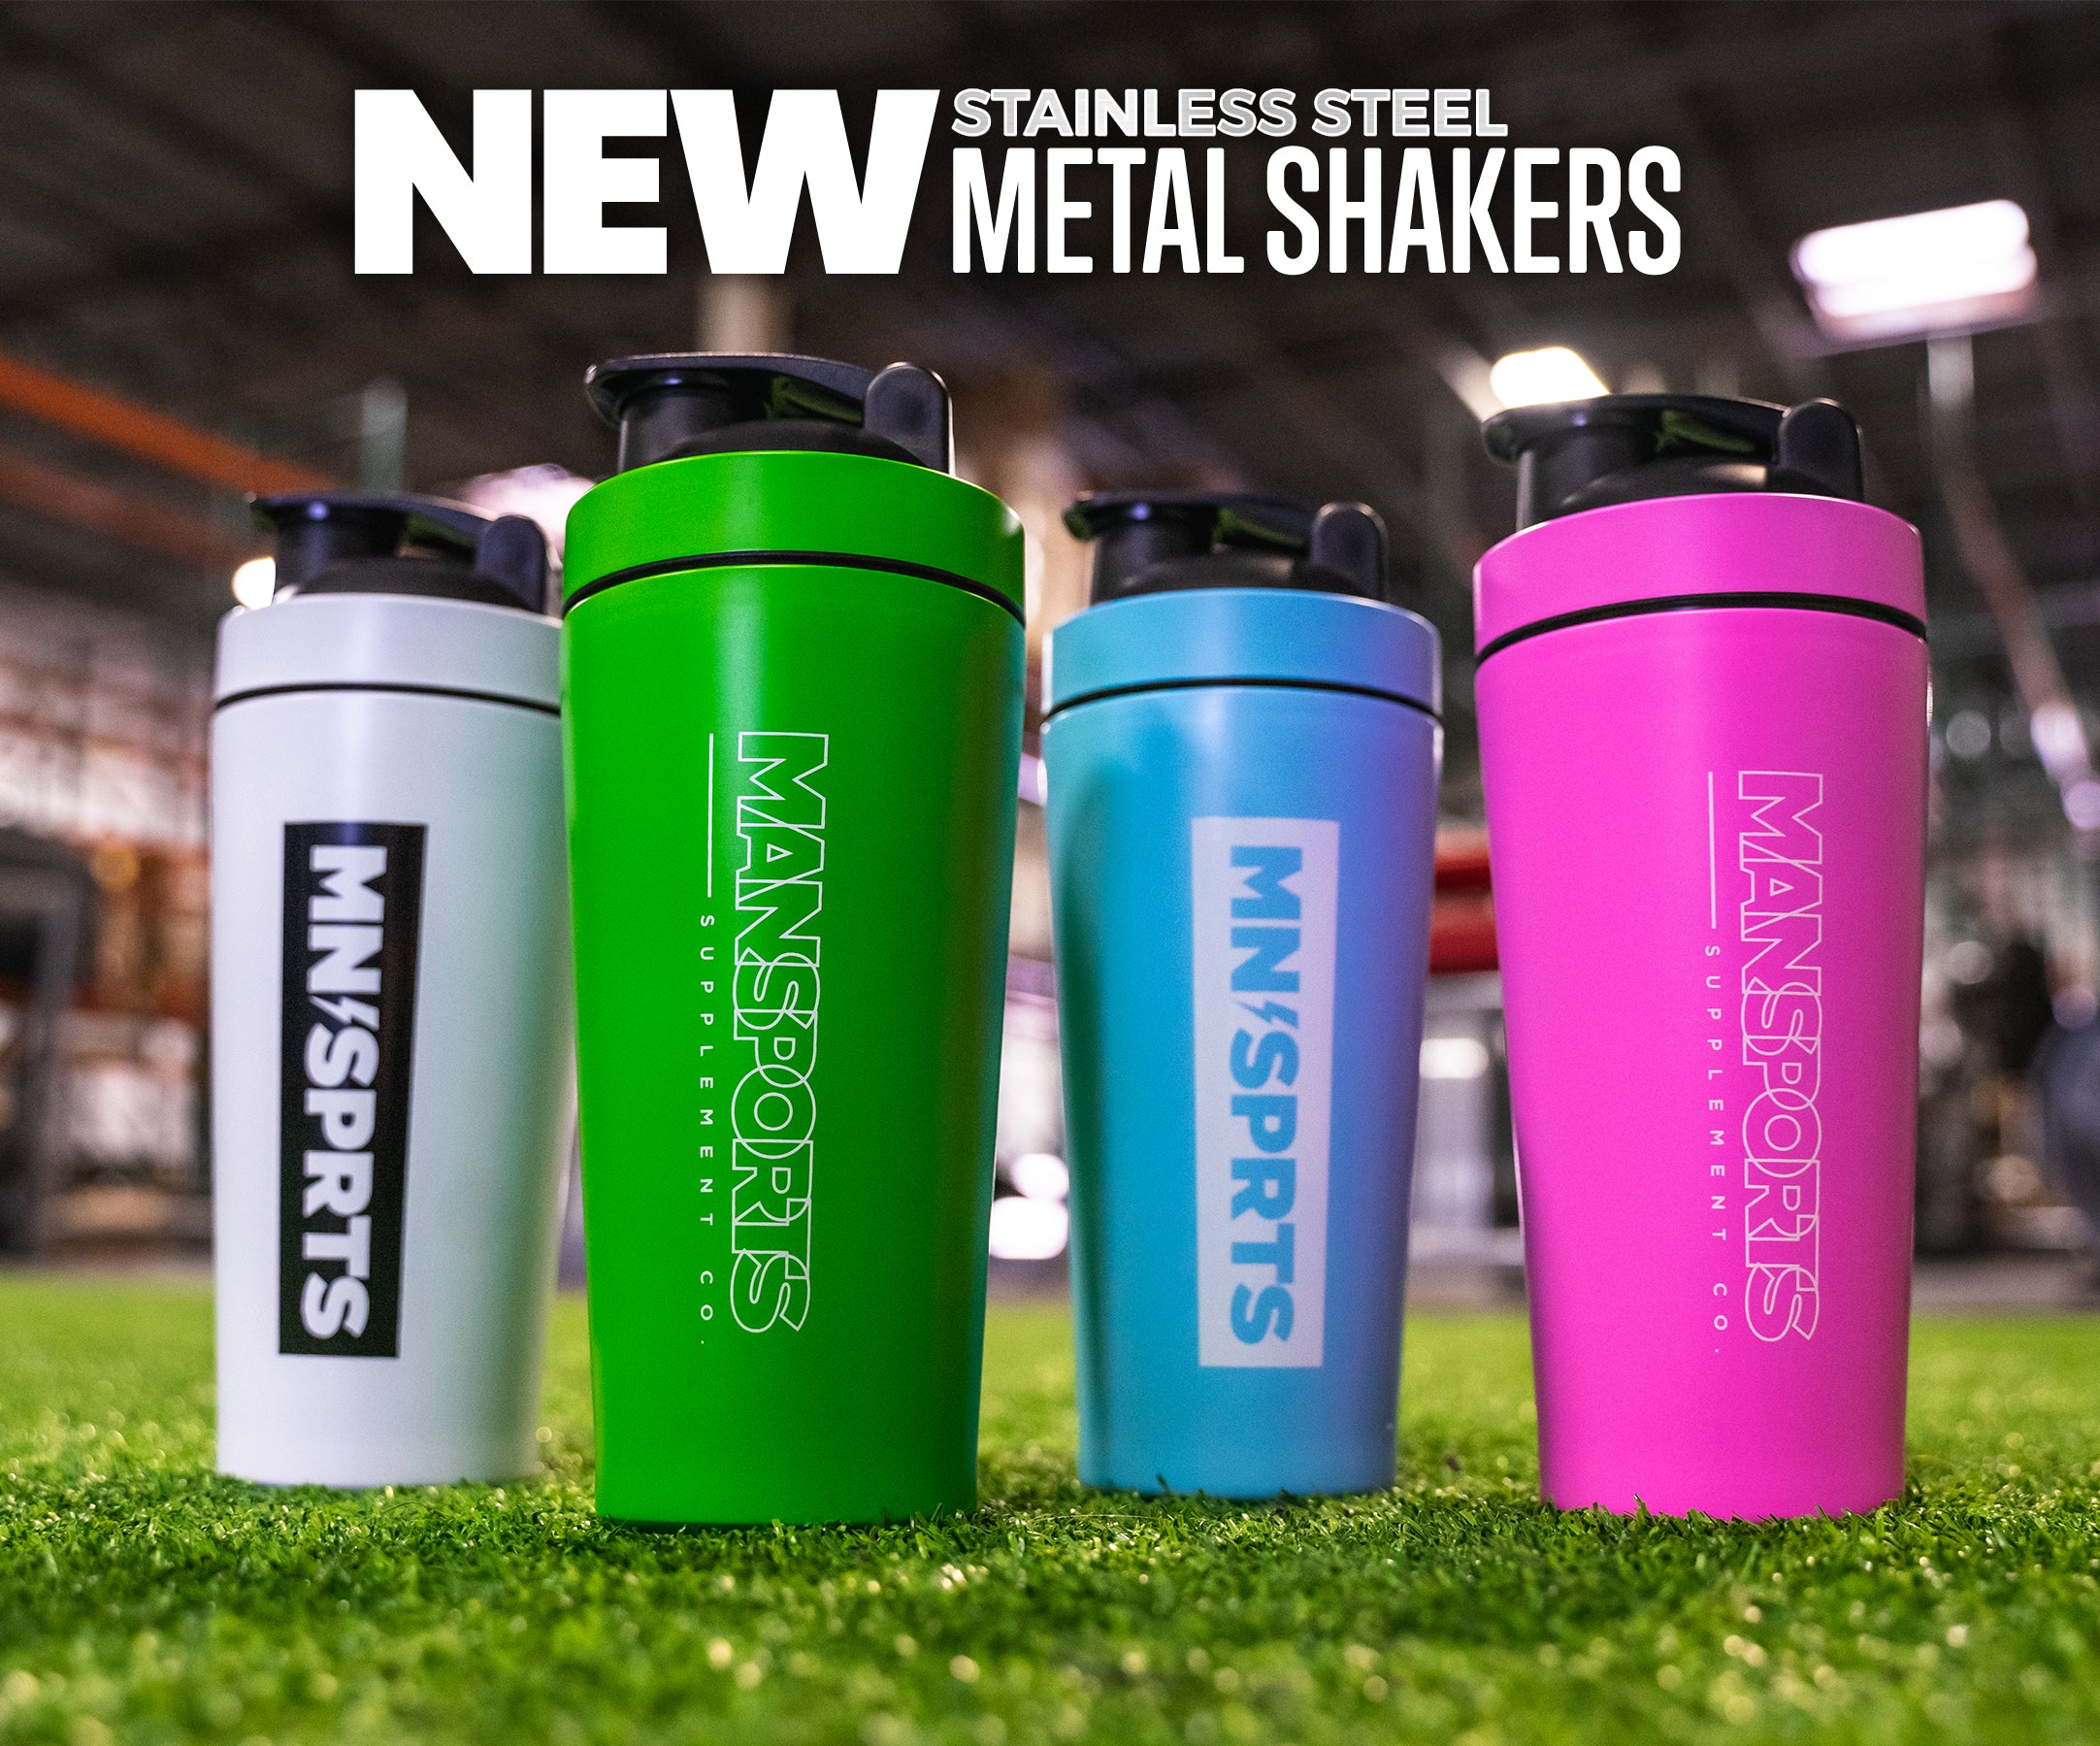 Respawn Limited Edition Shaker Merch